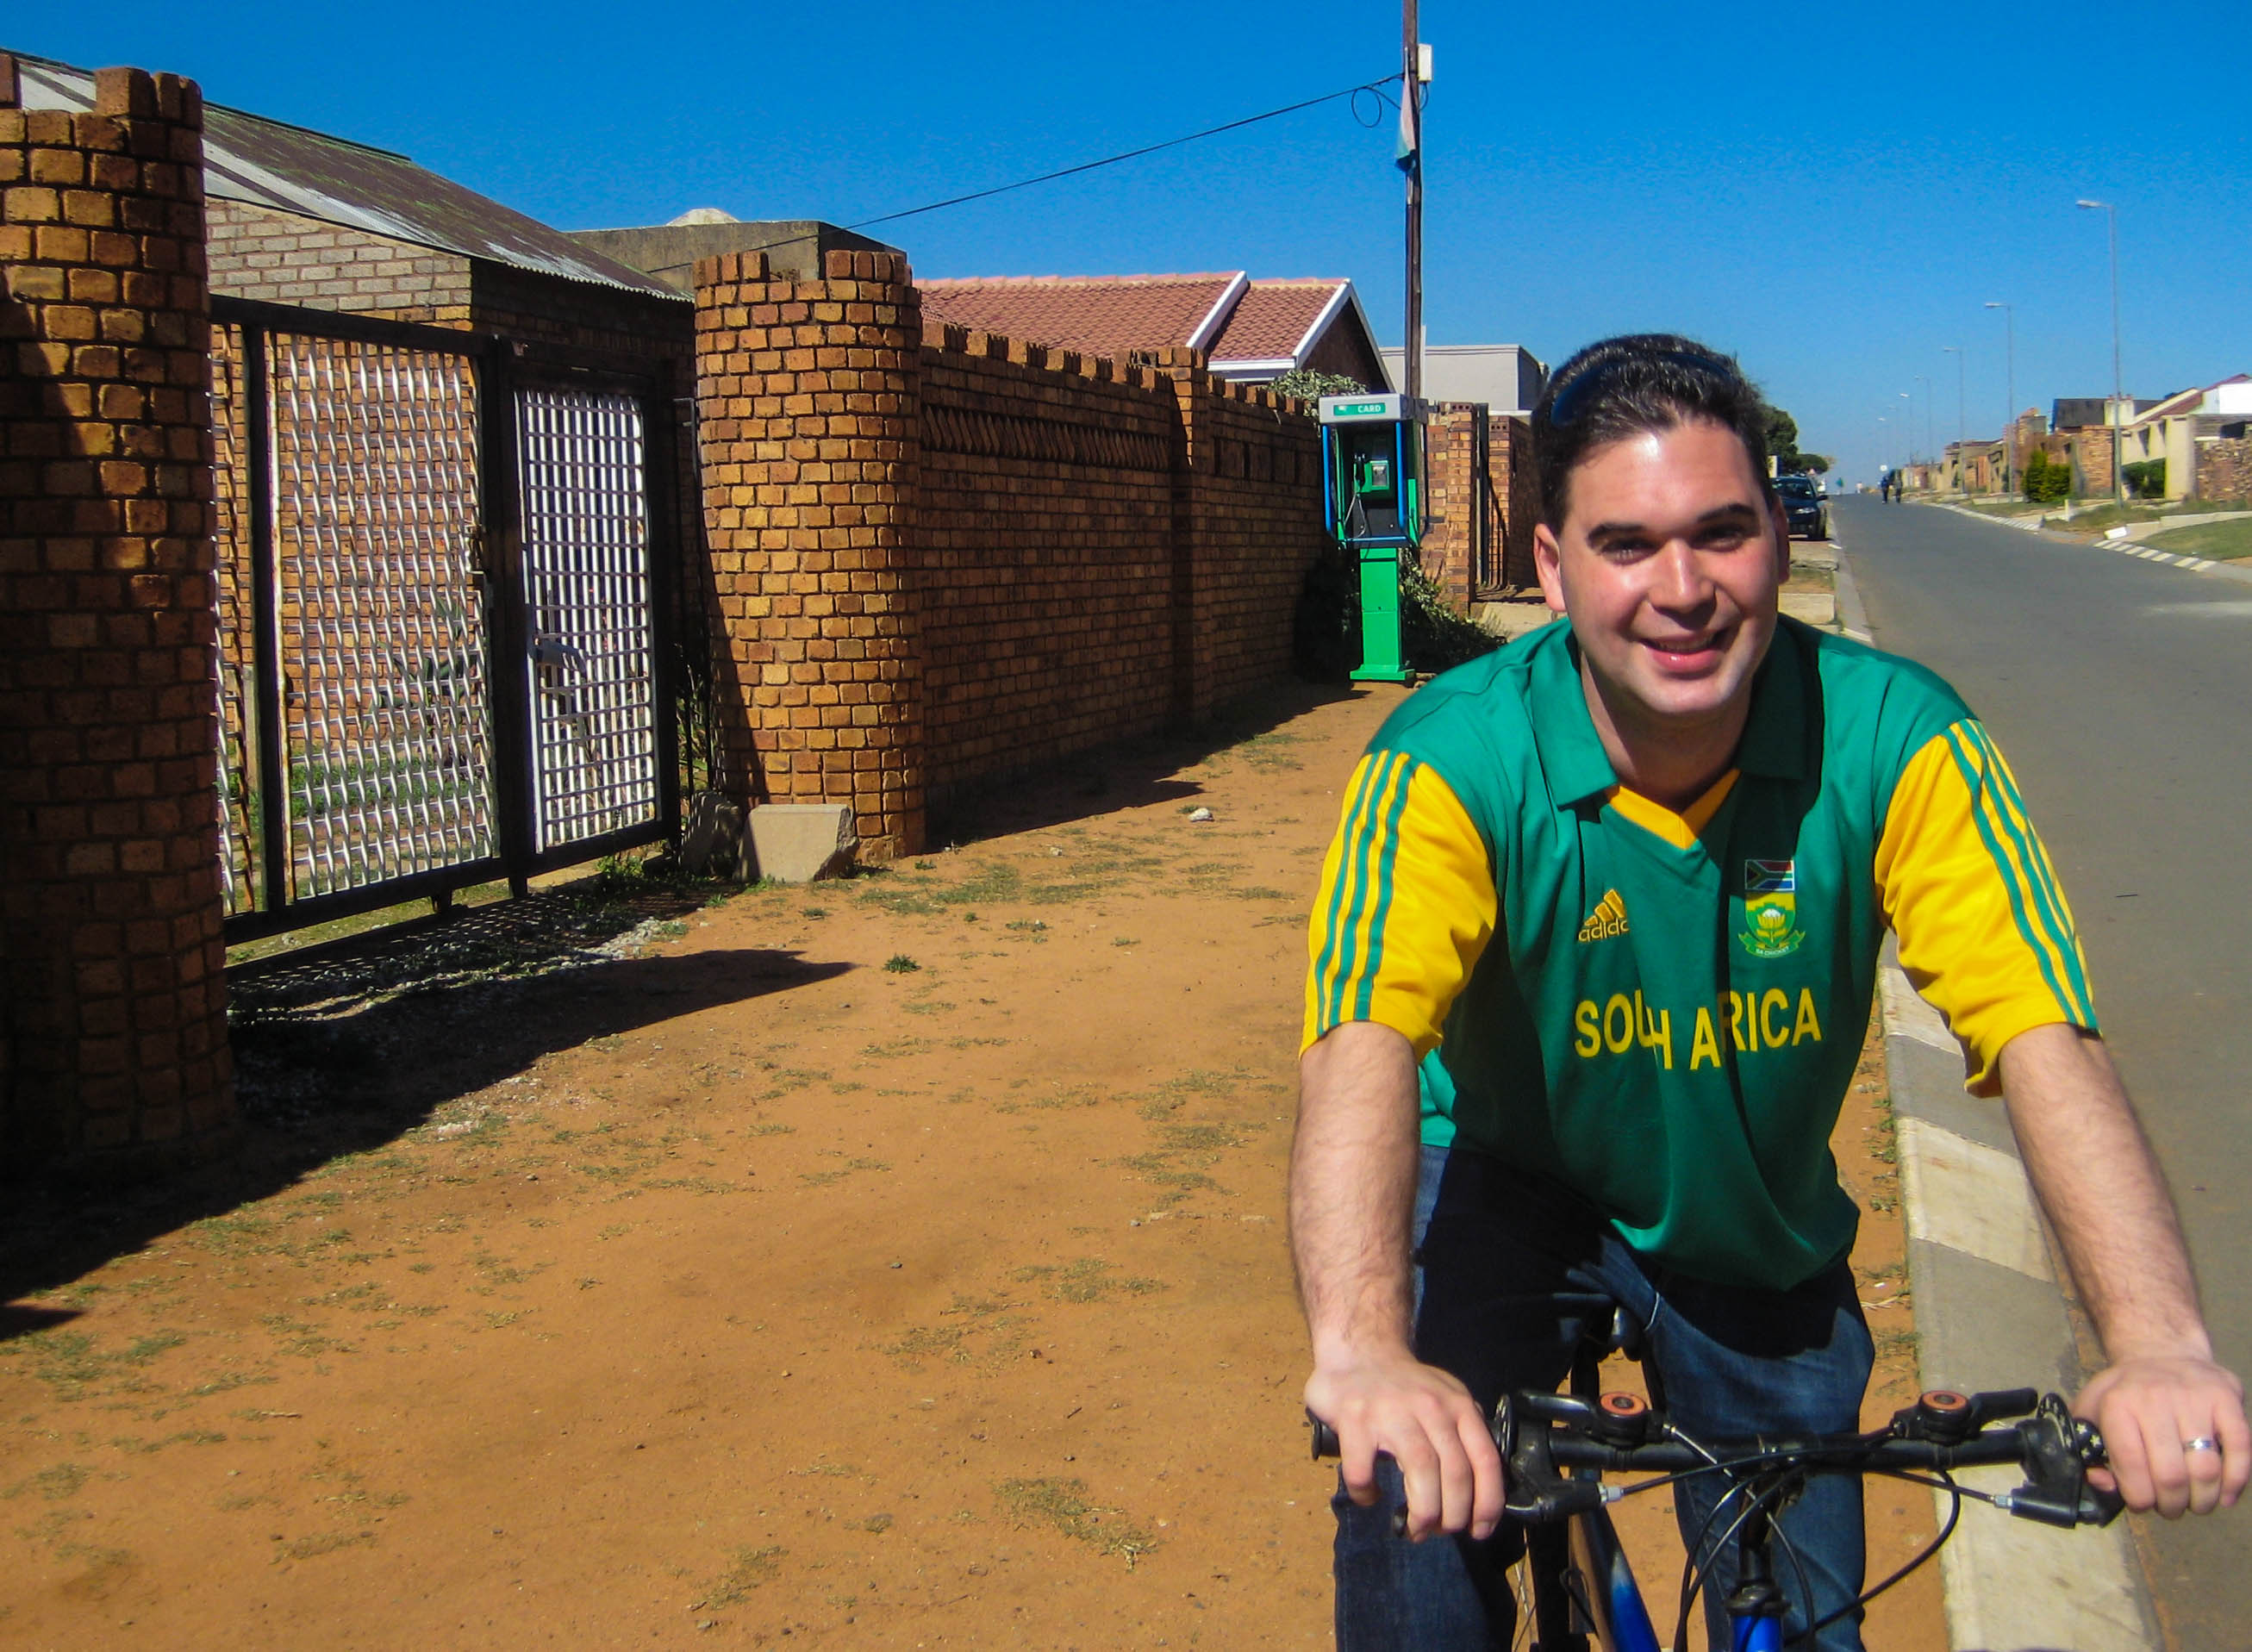 Exploring townships by bike can be an interesting way to cover more ground while still interacting with the locals